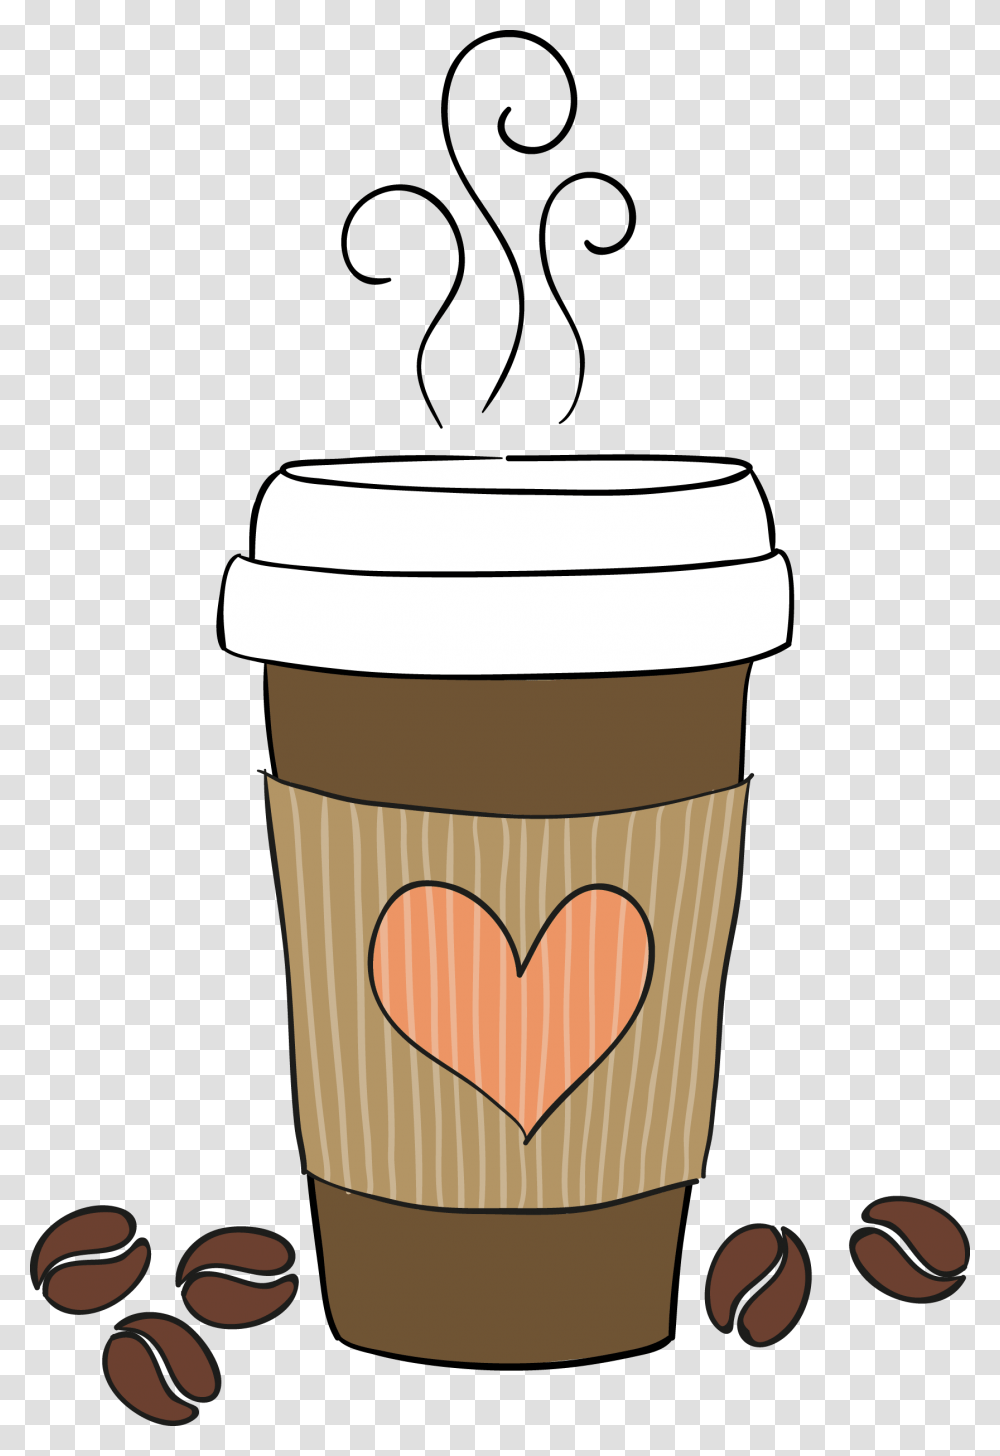 Coffee Tea Cocktail Cafe Breakfast Coffee Cartoon, Coffee Cup, Mixer, Appliance, Beverage Transparent Png